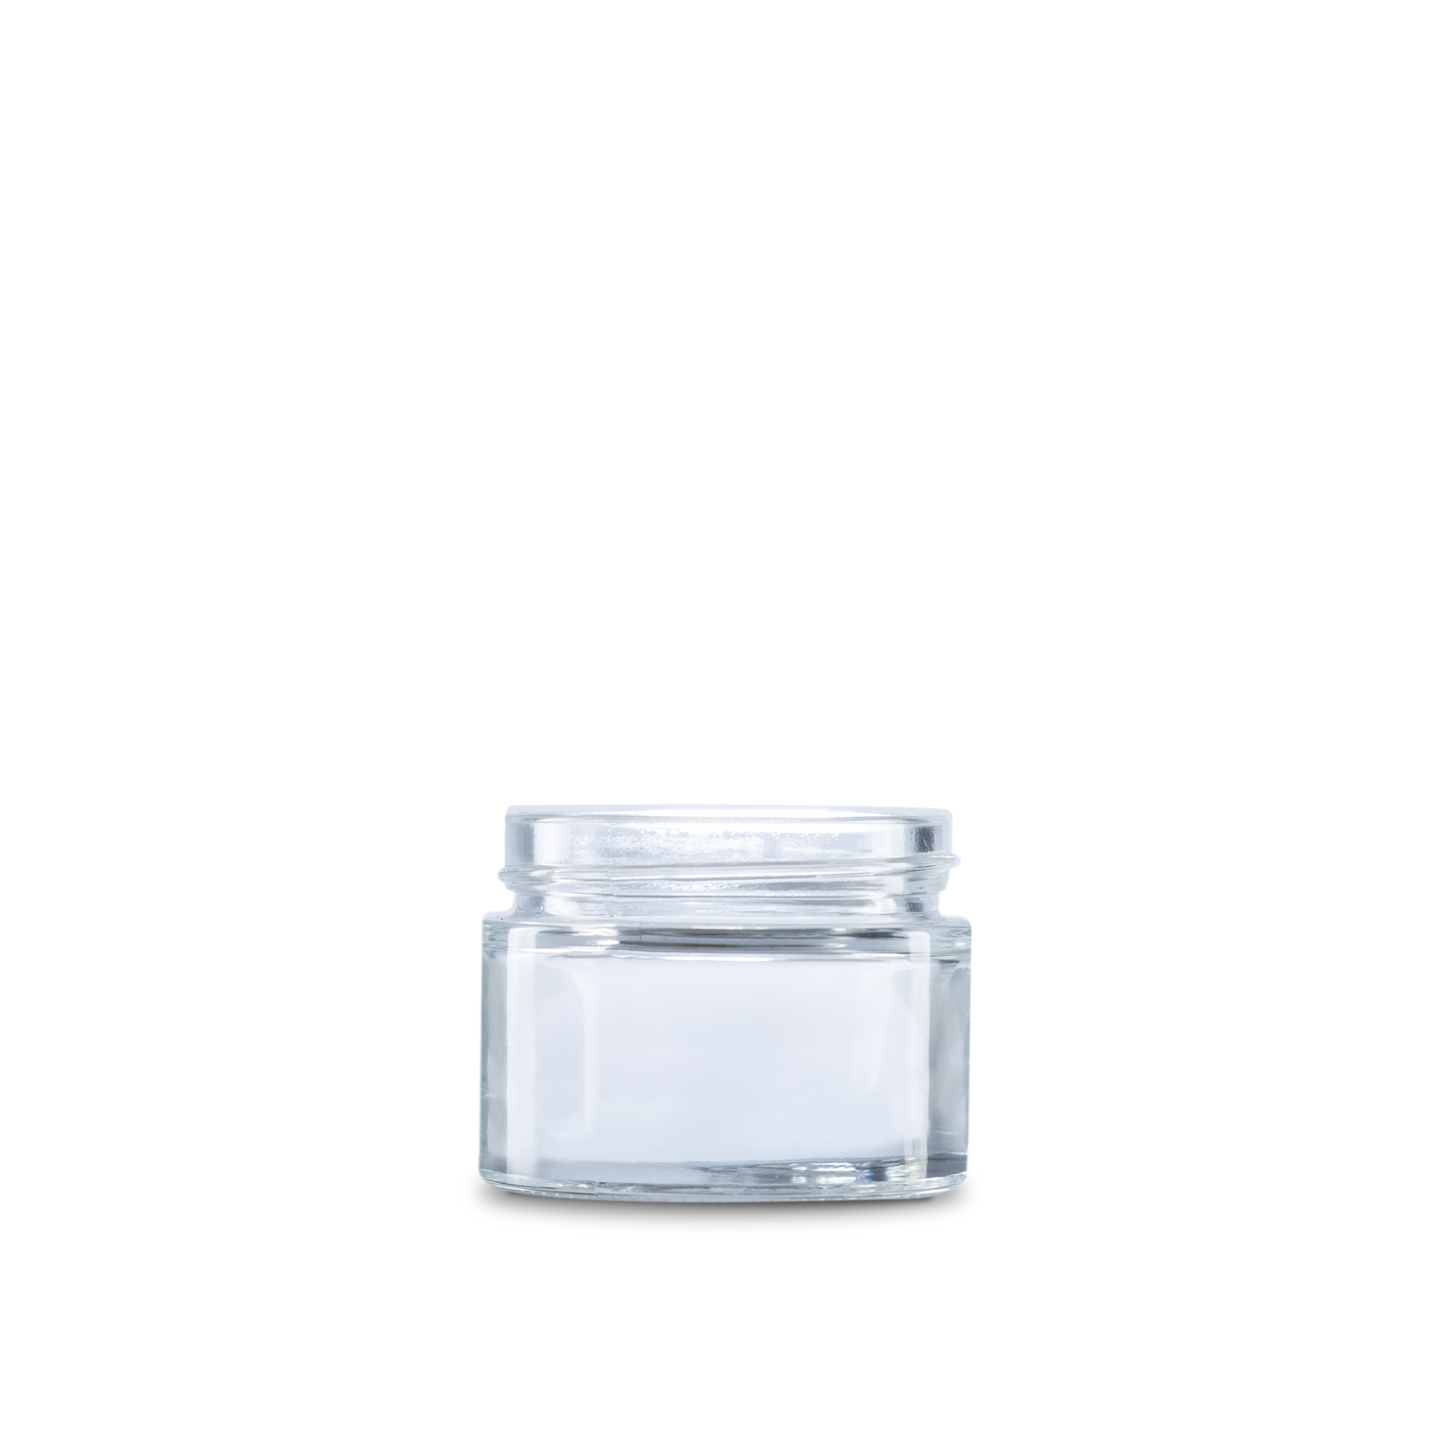 2 oz clear straight sided glass jars design and clear glass construction allow you to see the product inside. 